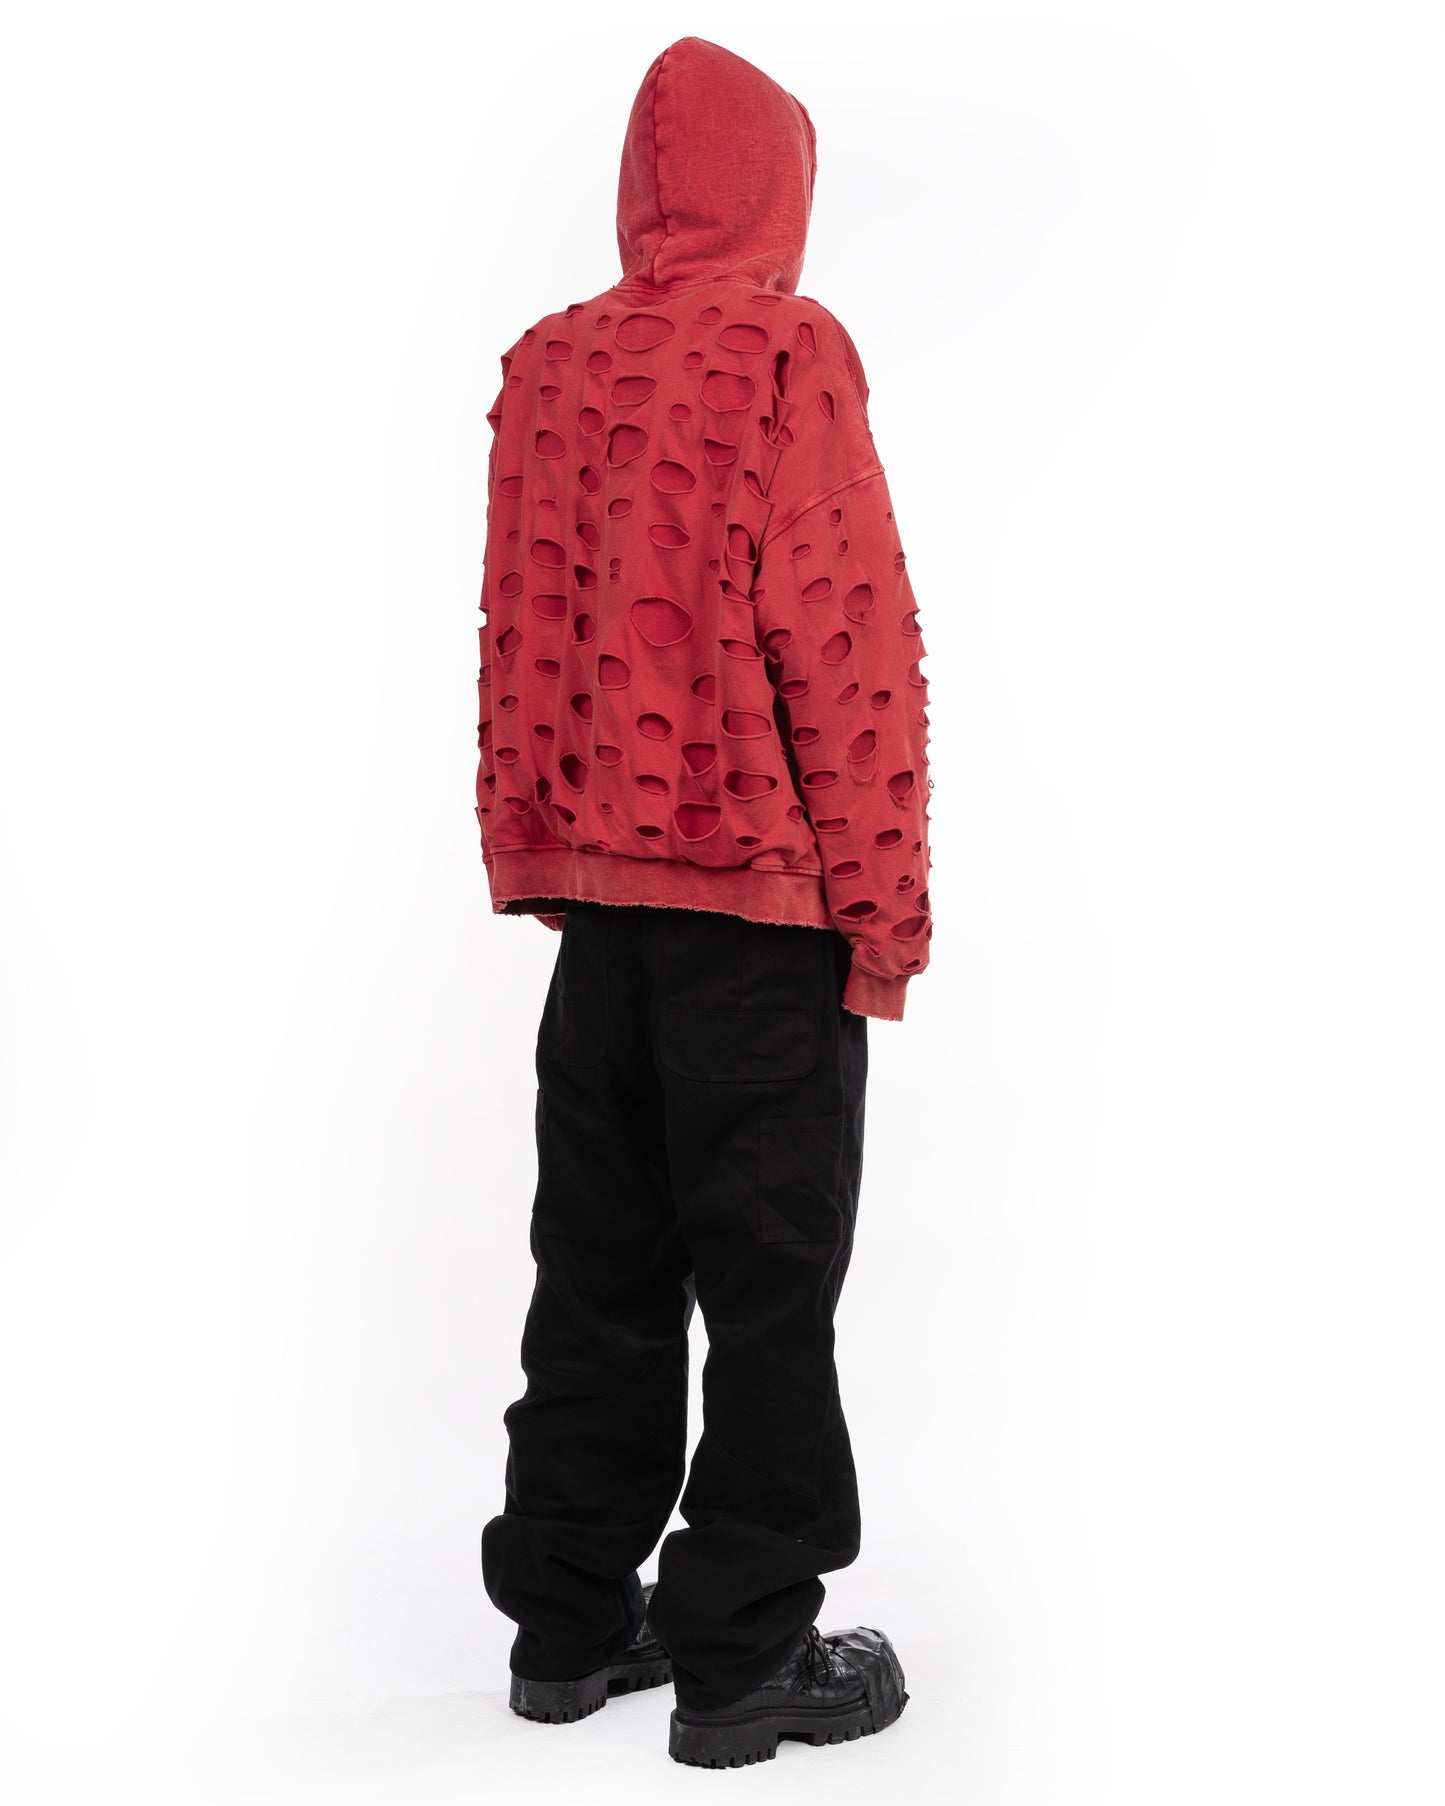 Double Layer Bodka Hoodie: Faded Red